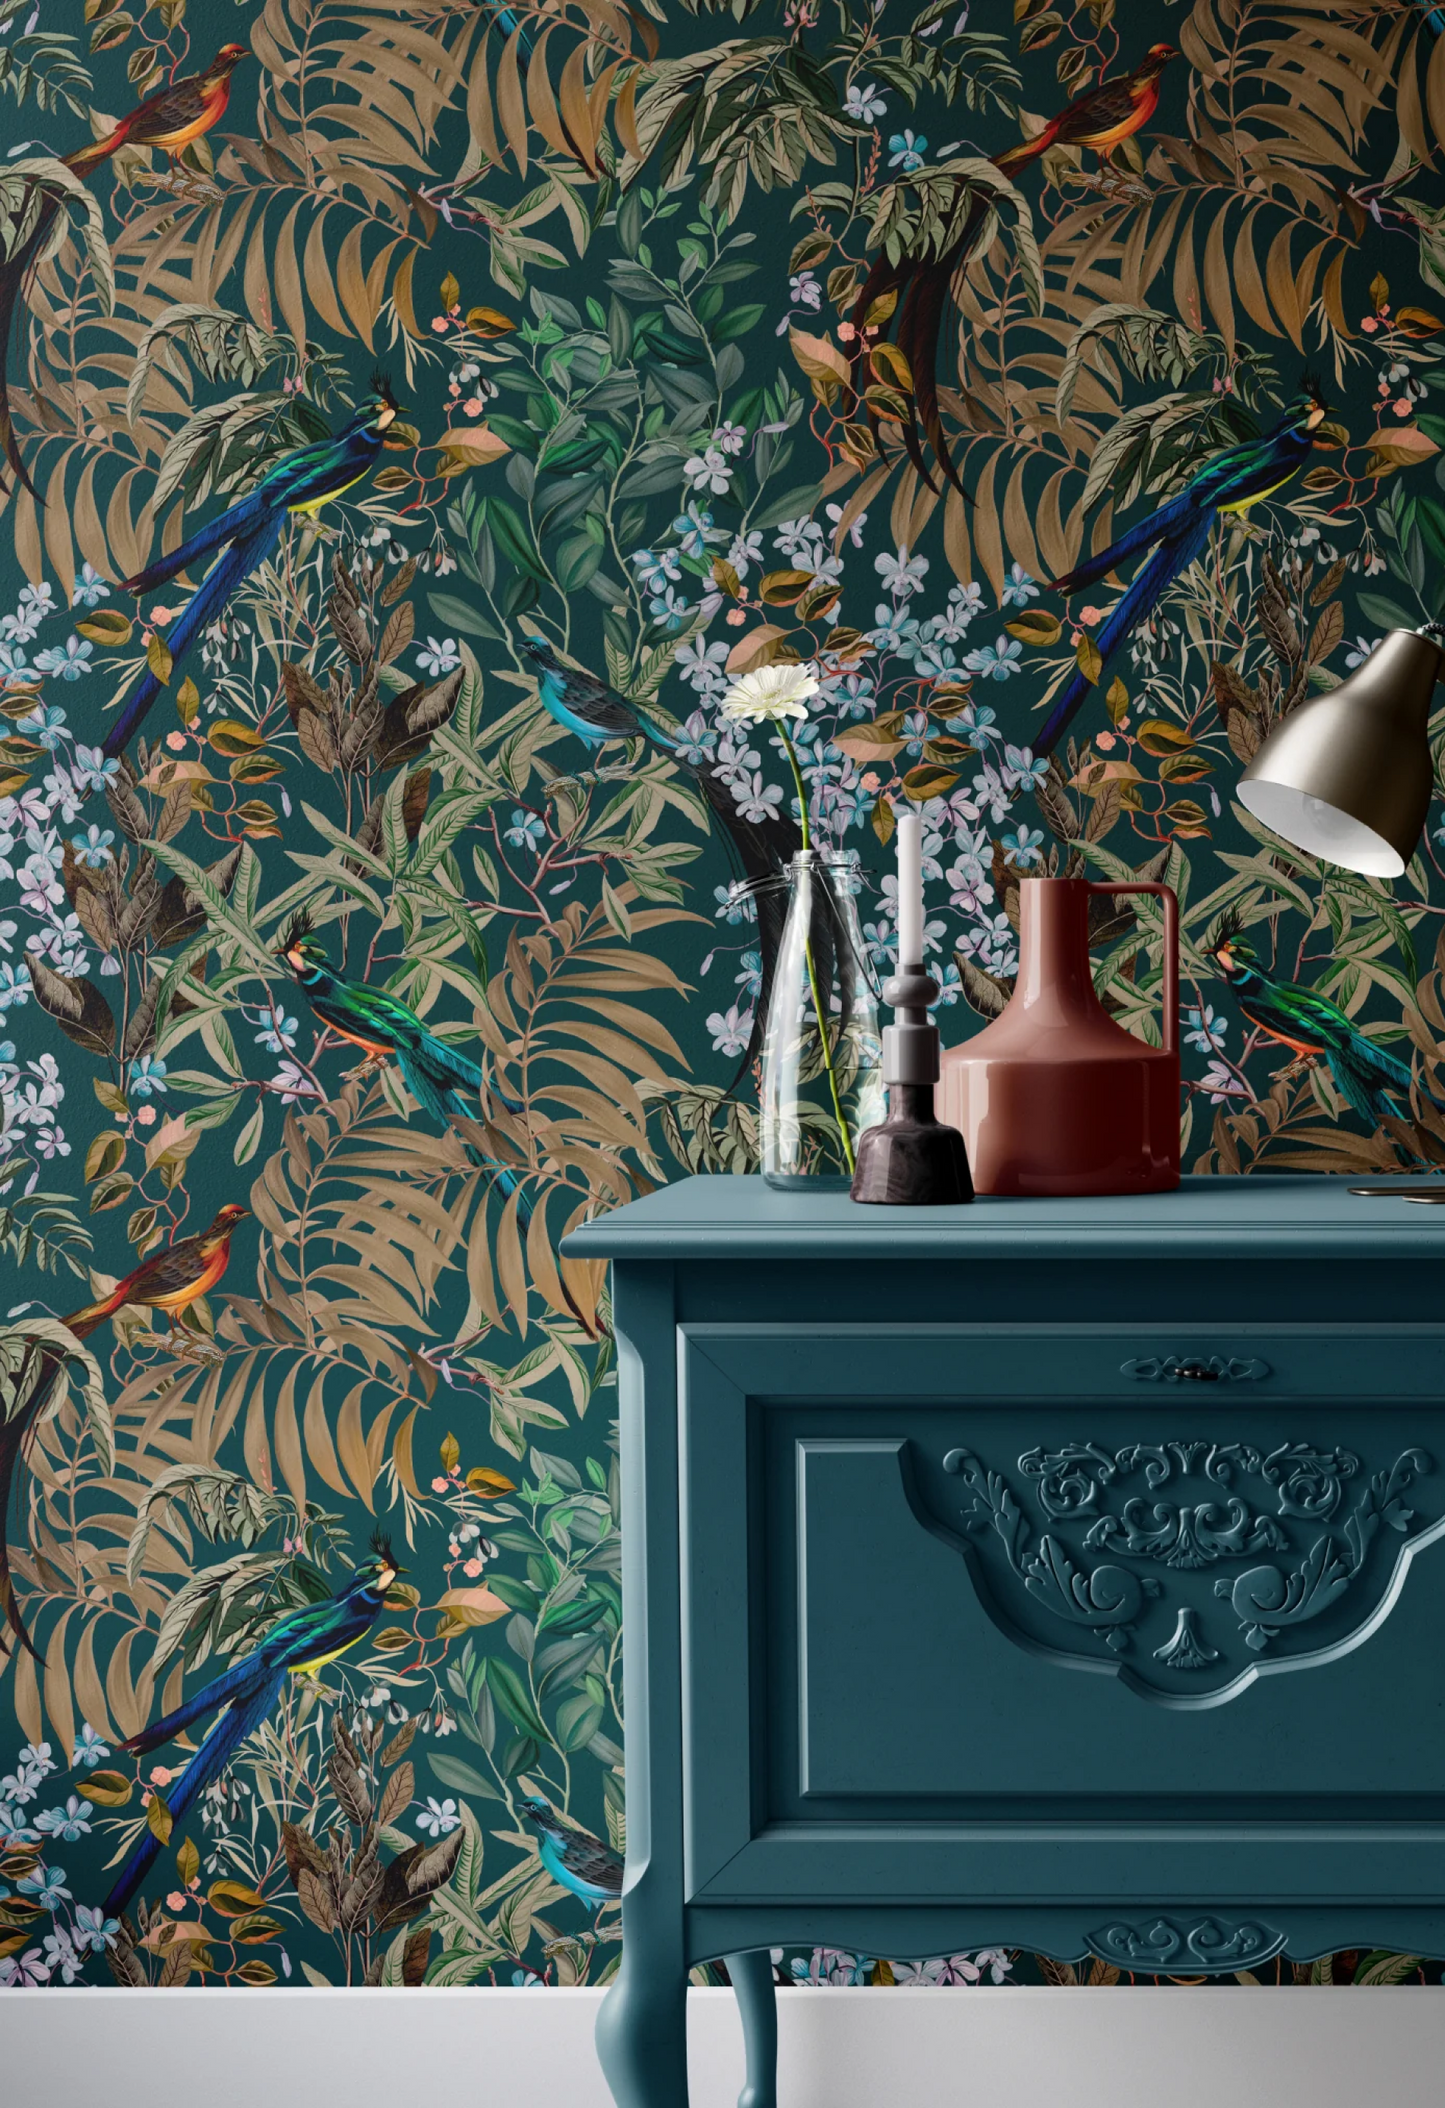 Vintage inspired room with teal cabinet surrounded by Deus ex Gardenia of Resplendent Woods Wallpaper in Forest with dark green tropical birds and flowers.